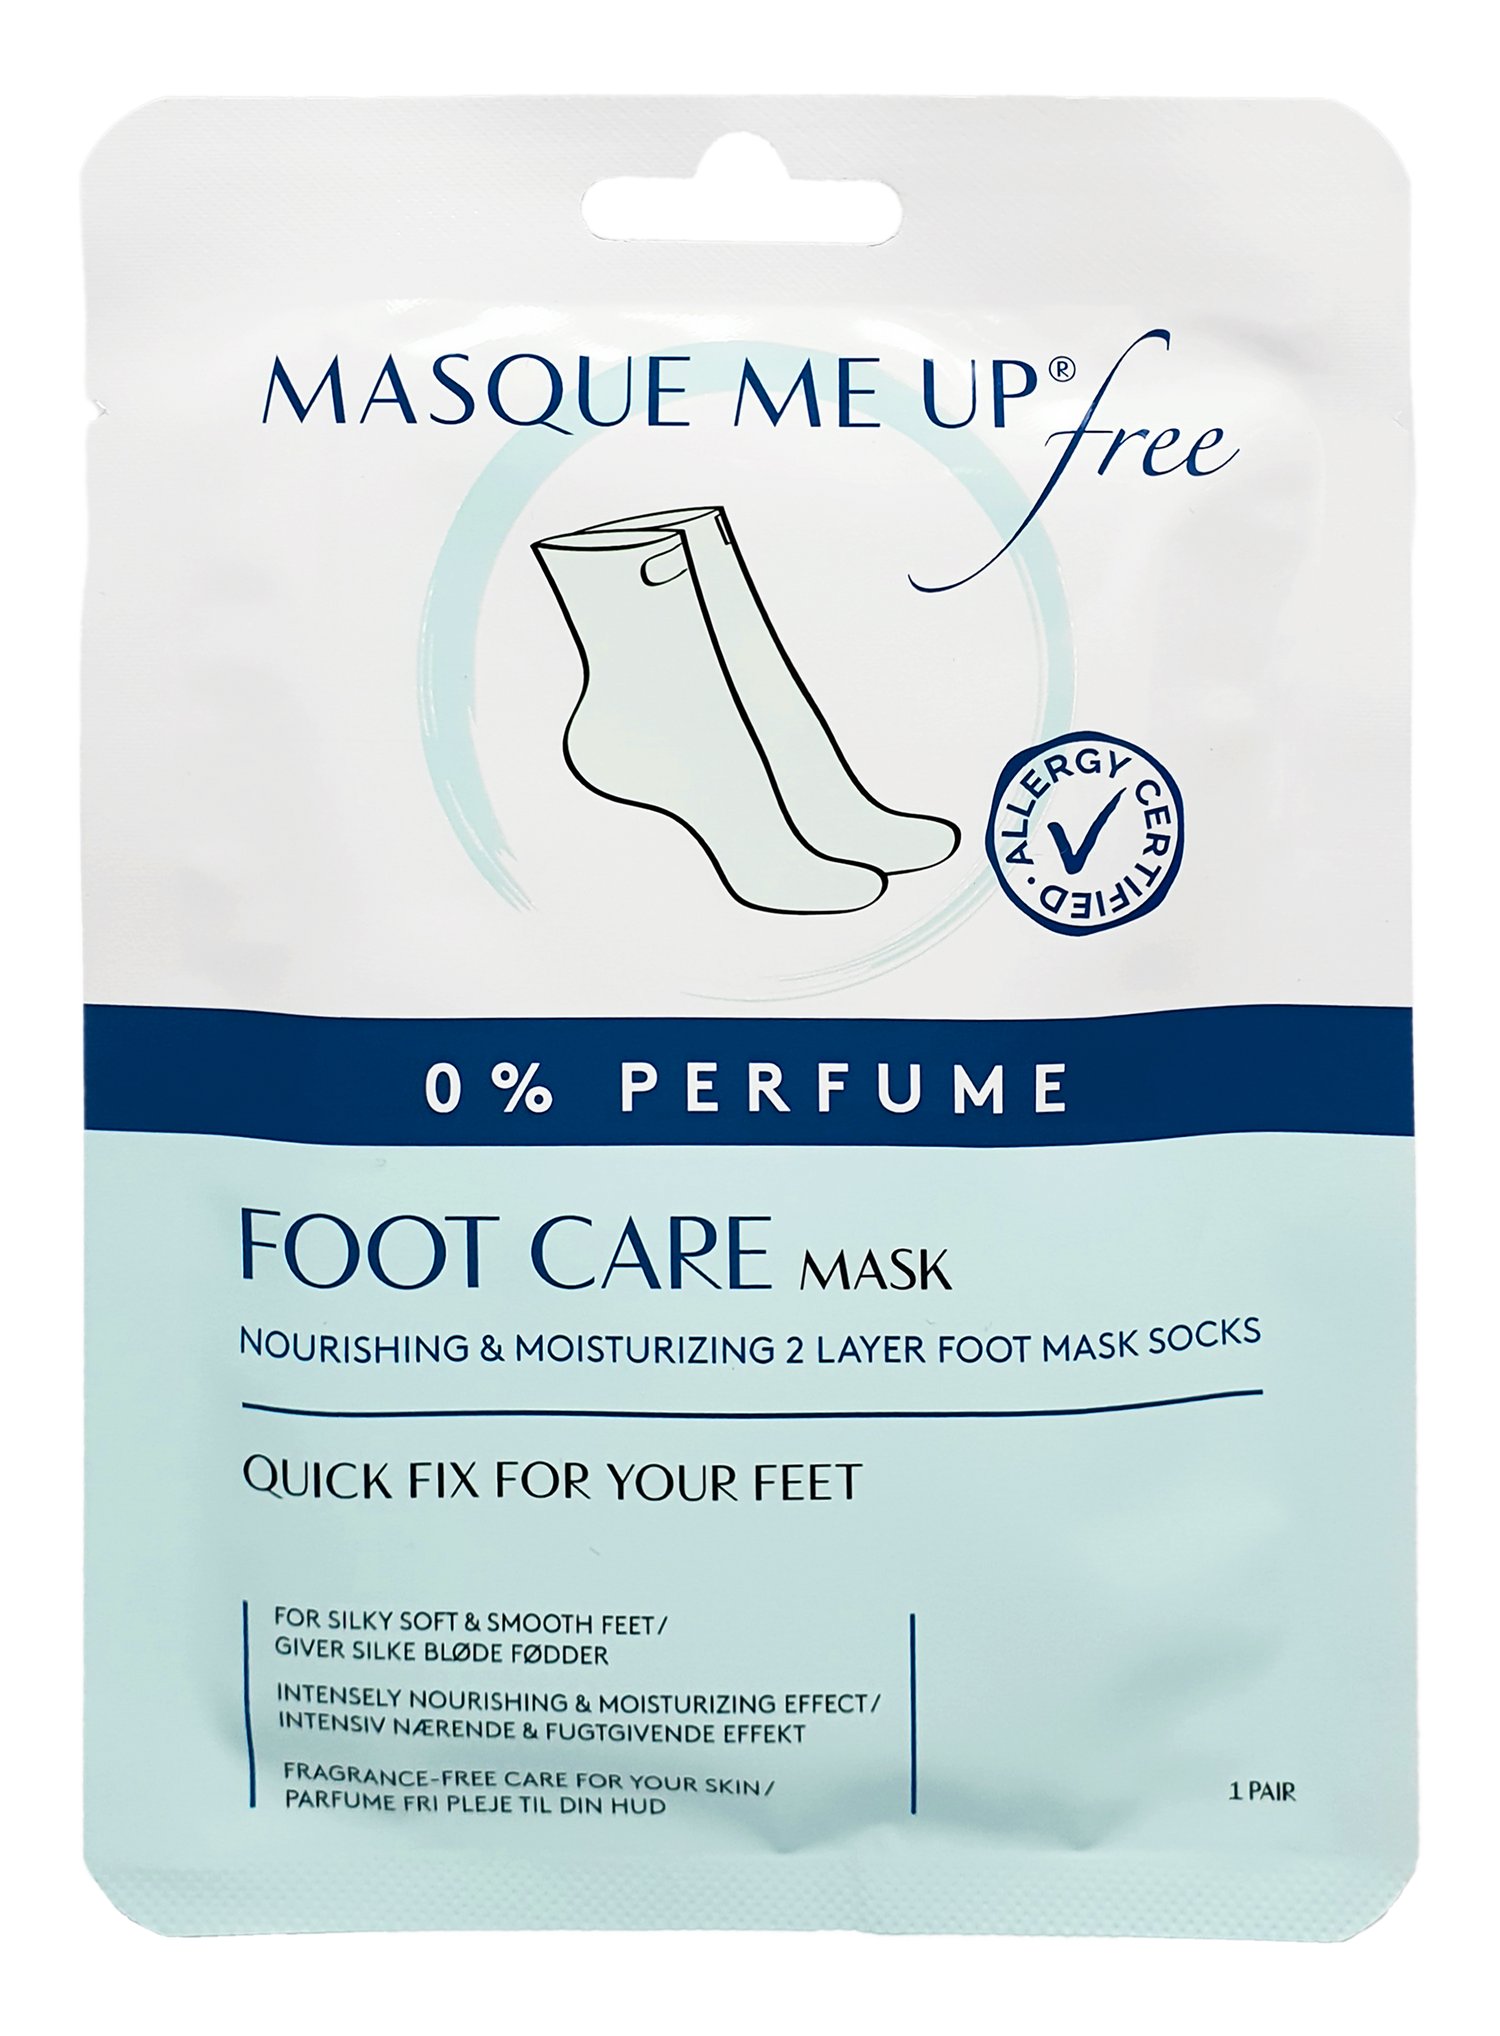 Free Foot Care Mask